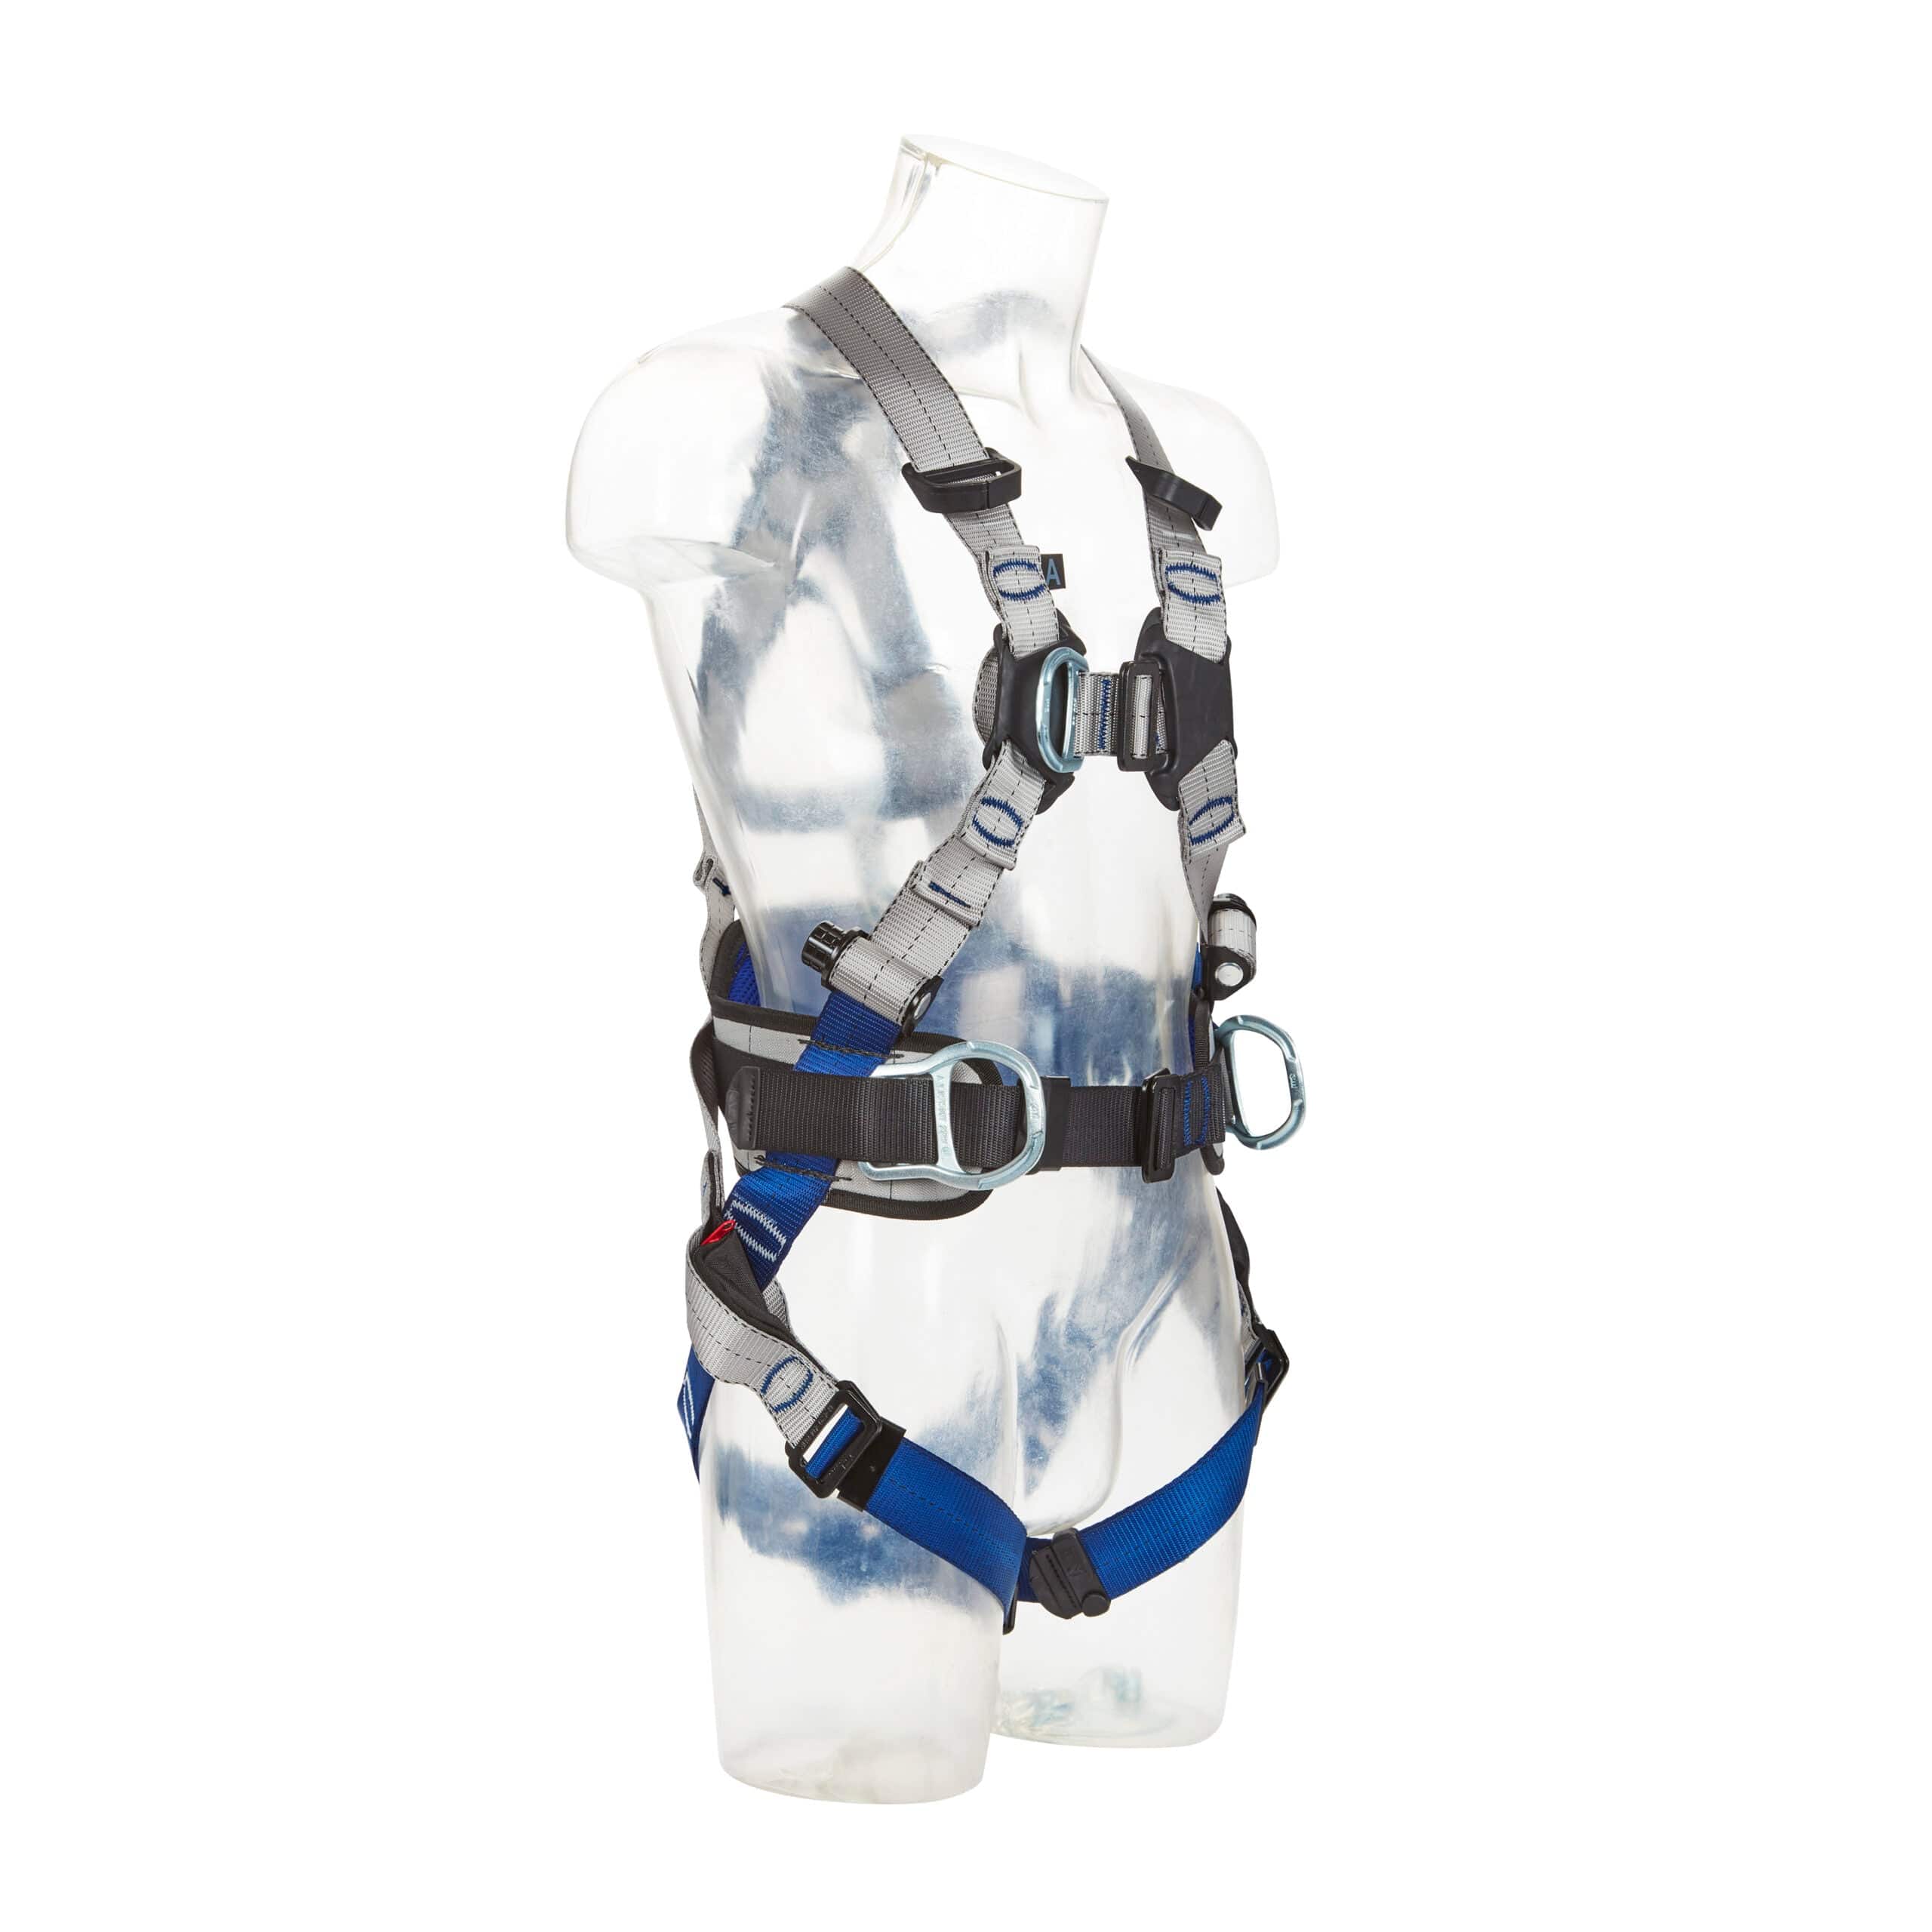 3M DBI SALA ExoFit XE50 Positioning Safety Harness - SecureHeights